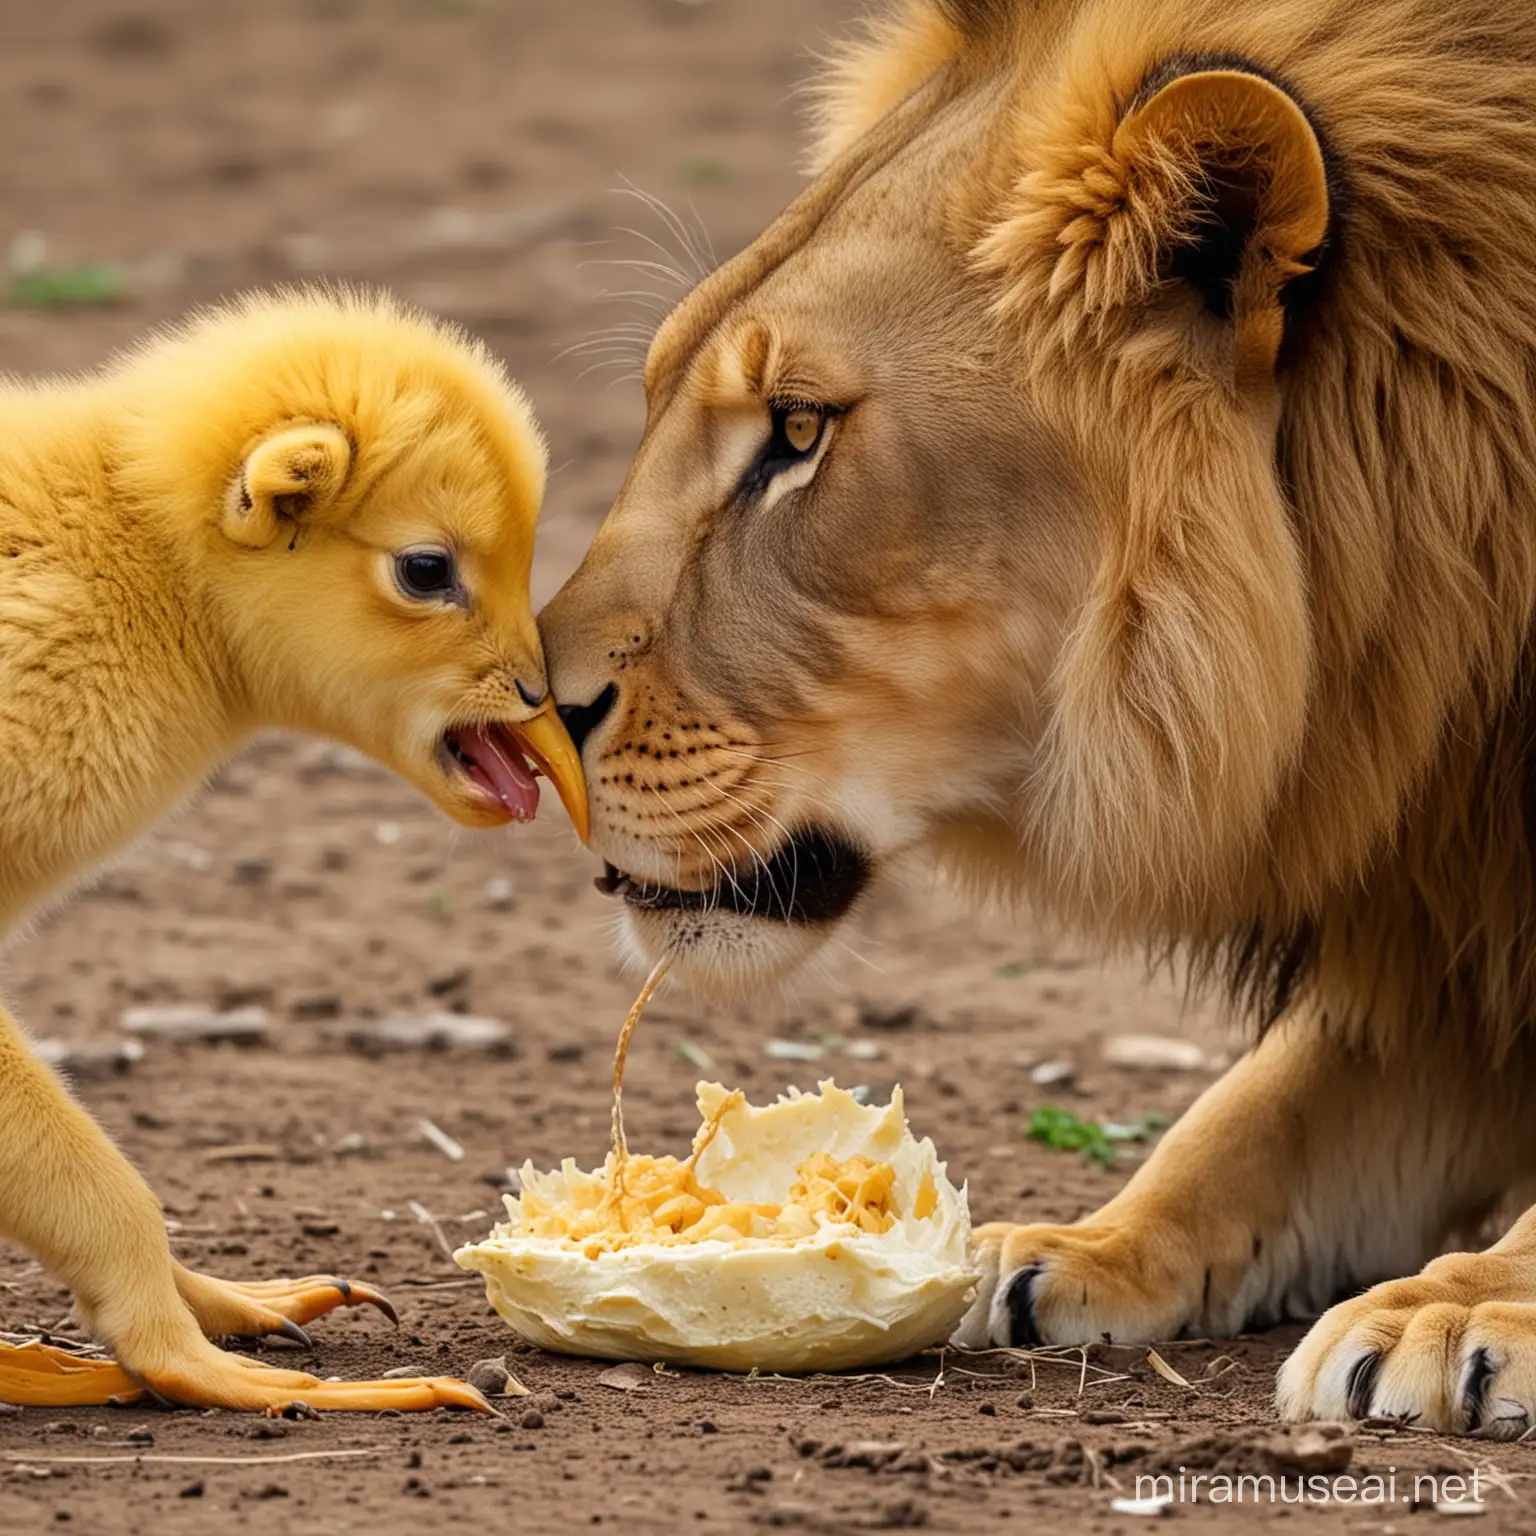 Brave Chick Defies Odds by Feasting on Majestic Lion